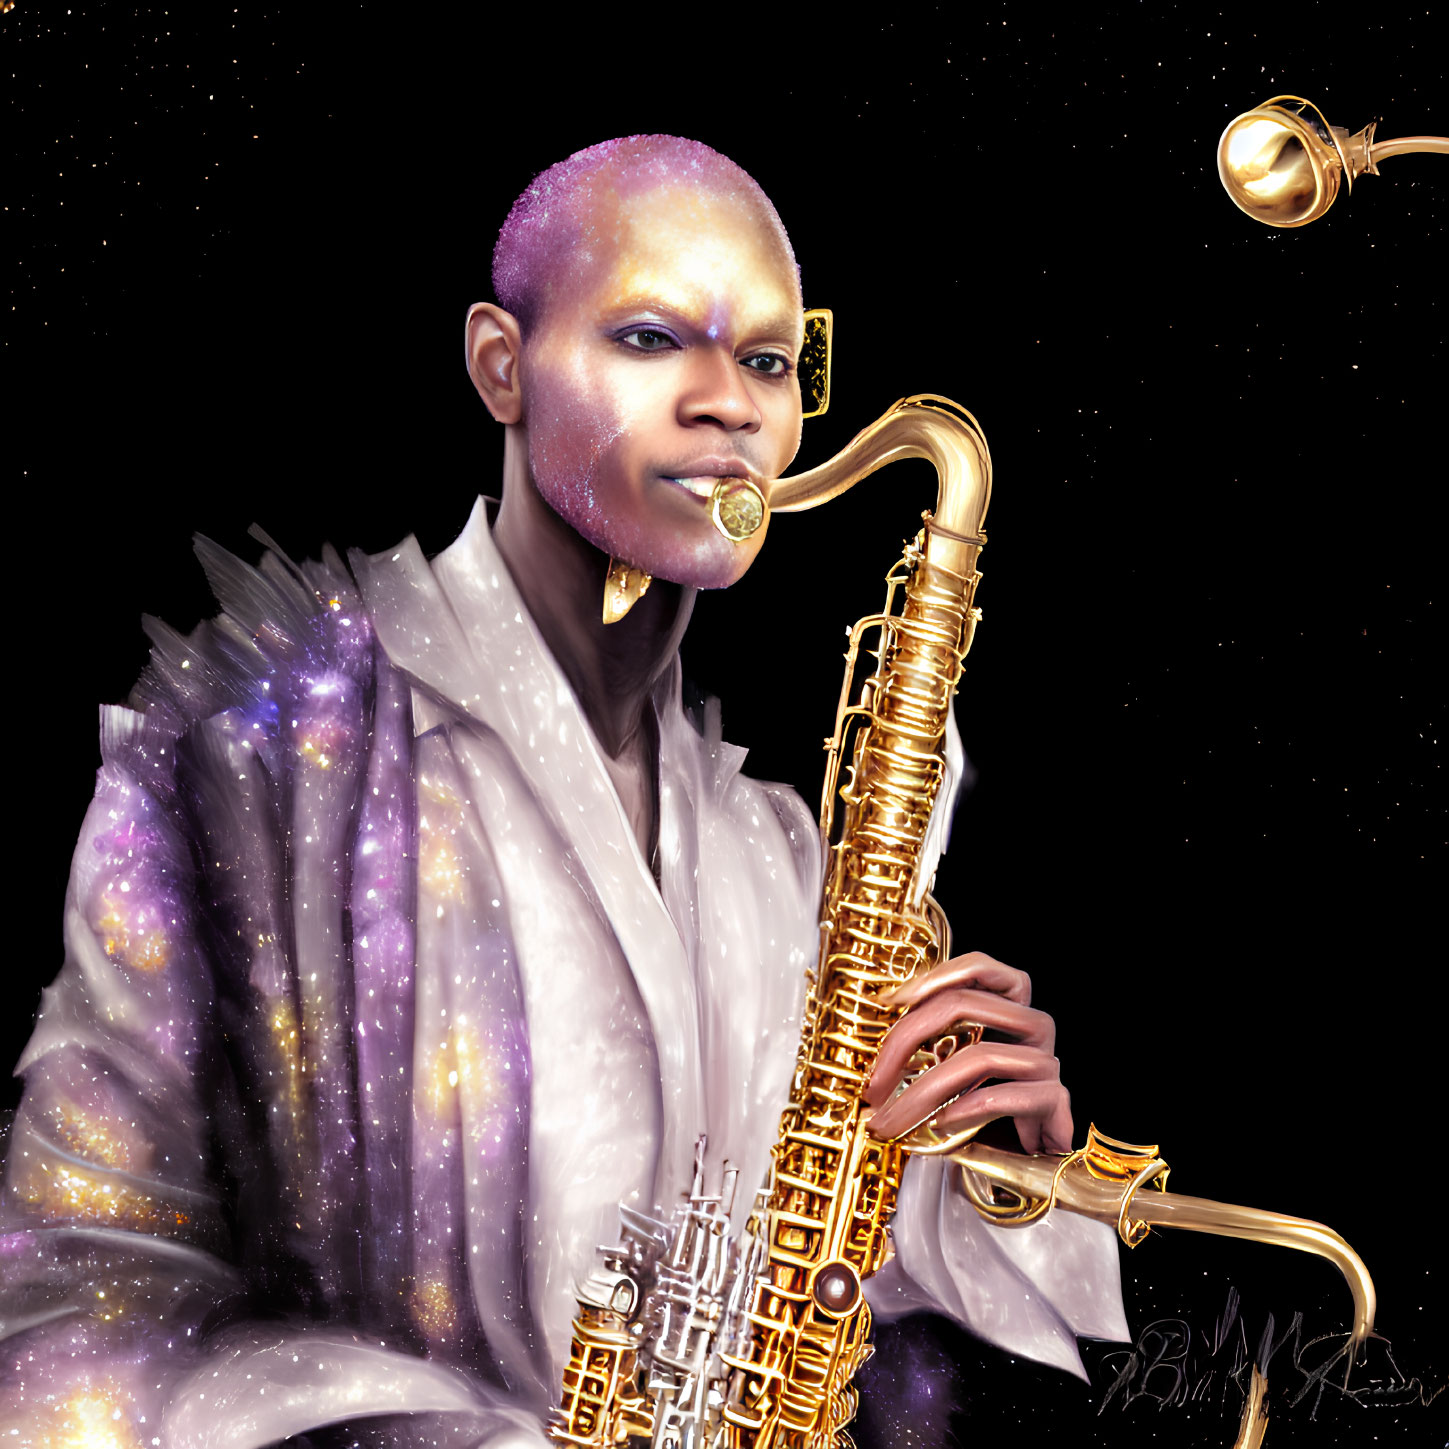 Portrait of Person with Saxophone in Cosmic Theme